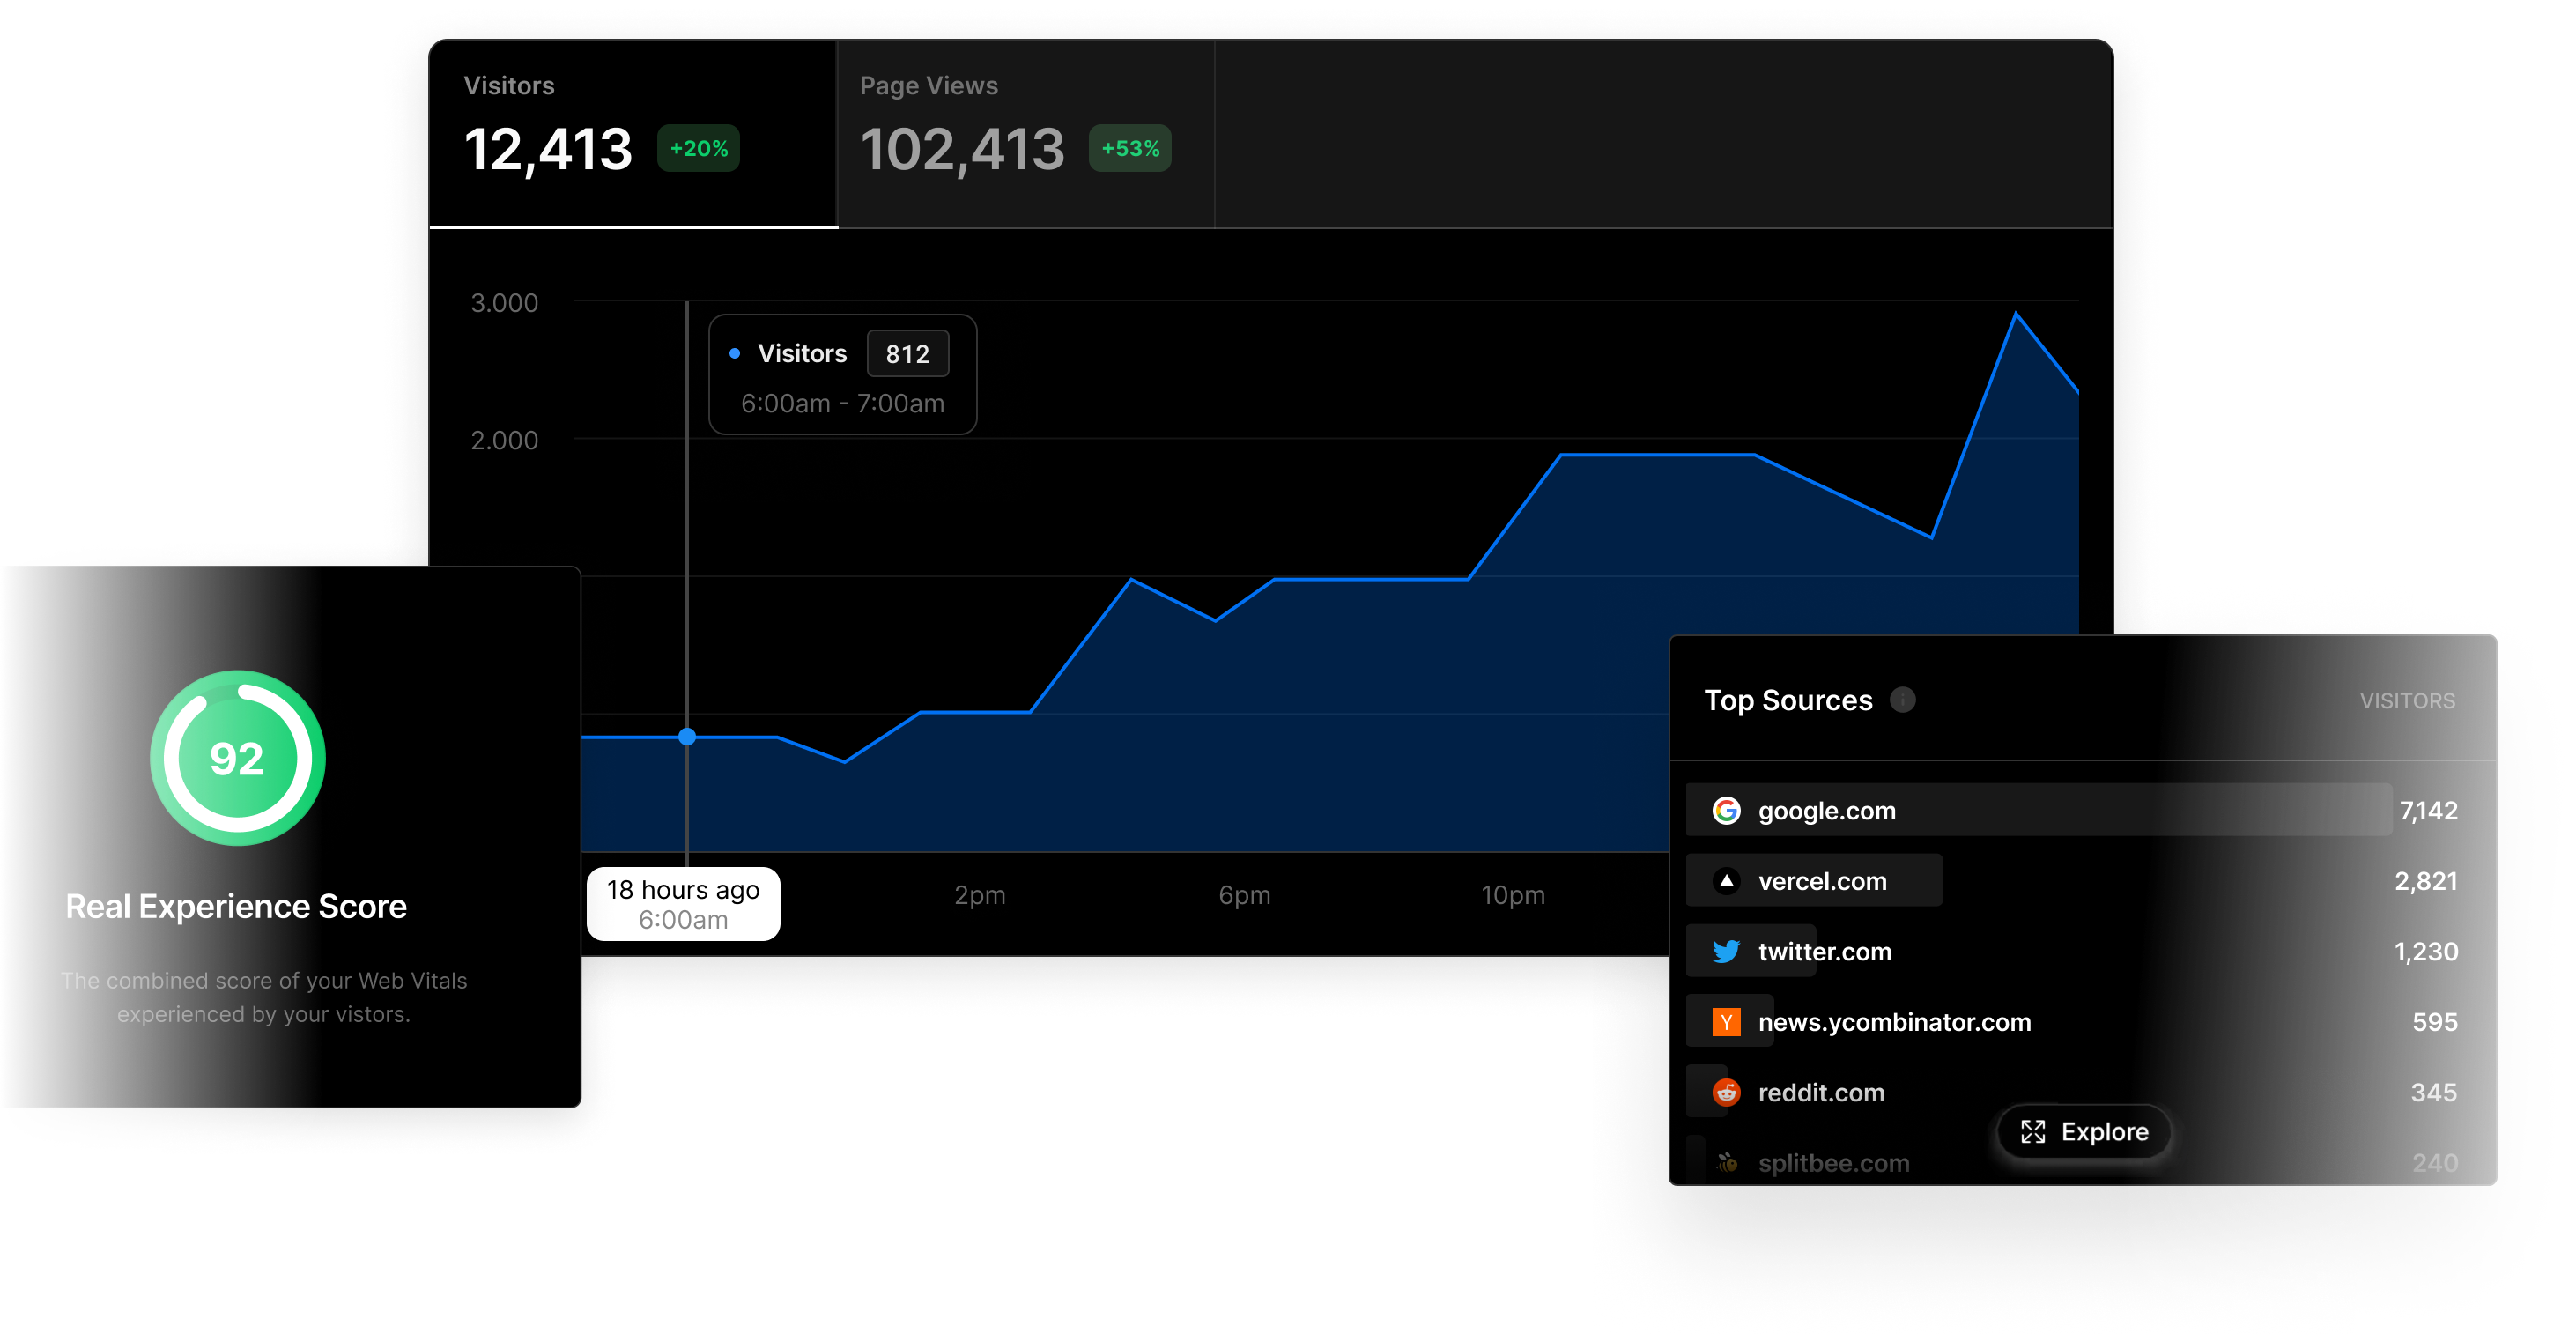 Preview screenshot of Vercel Speed Insights dashboard with Real Experience Score of 97